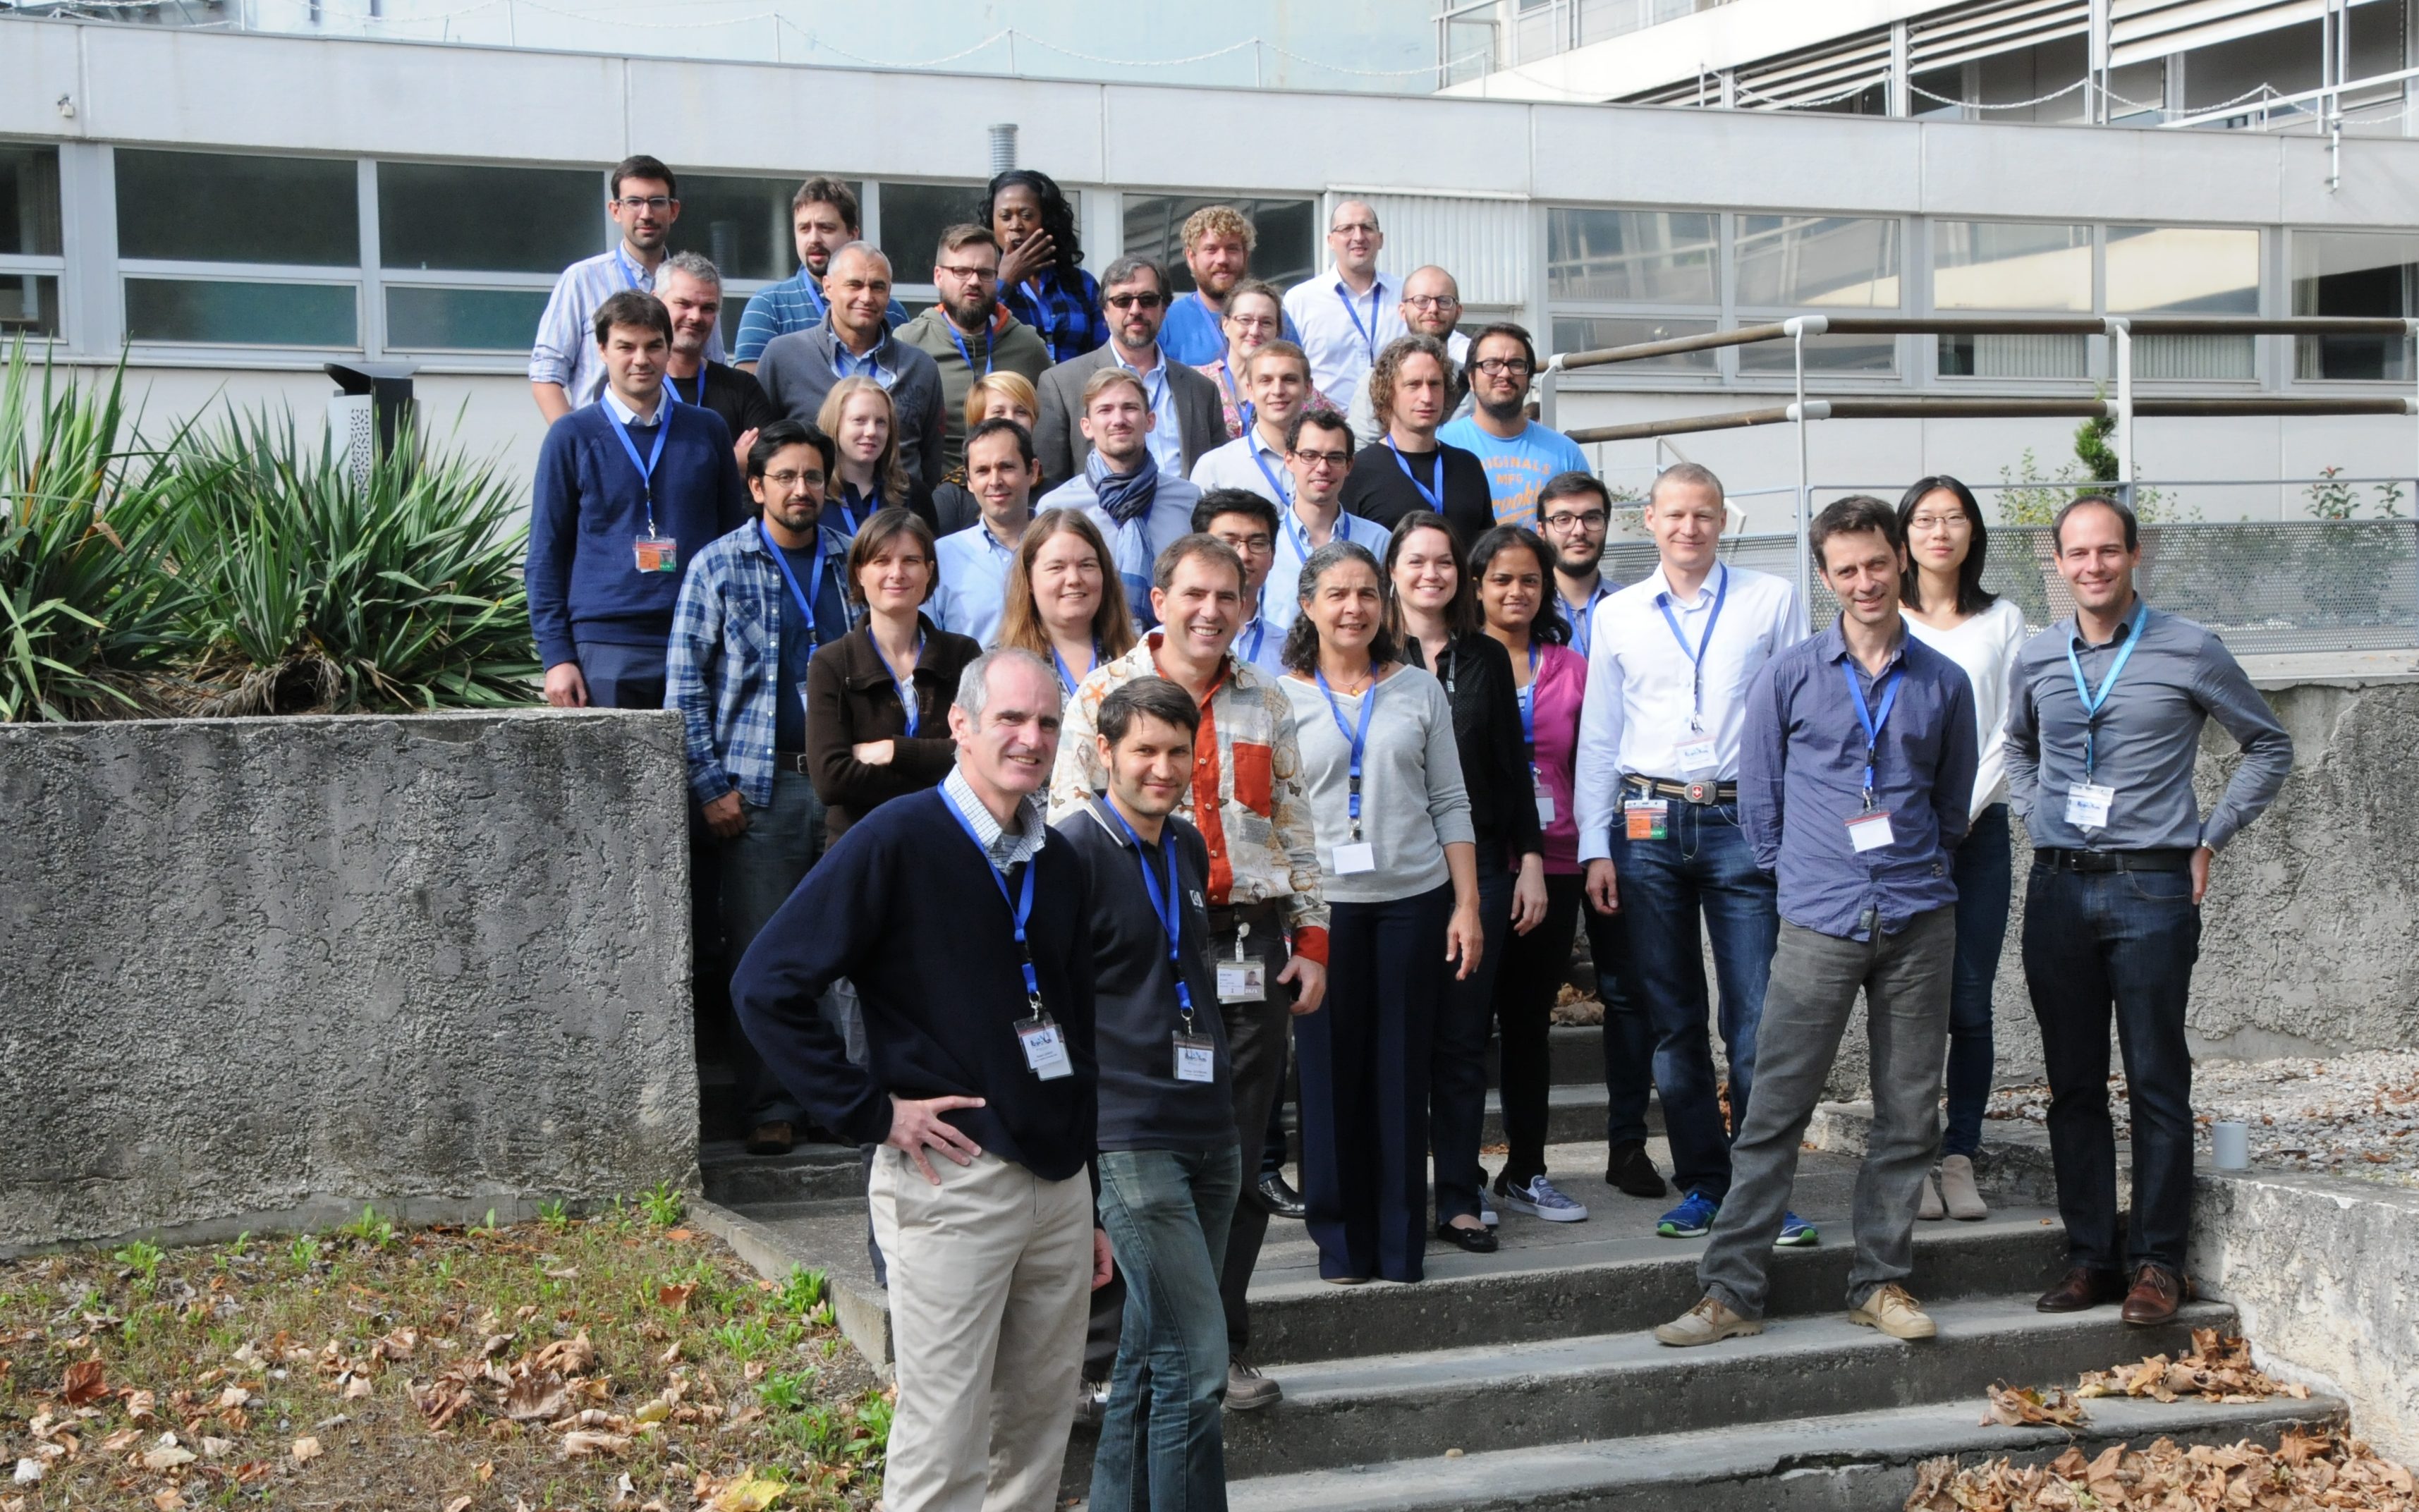 Participants of the RheoSAS workshop at the ILL. Copyright: ILL/S. Claisse